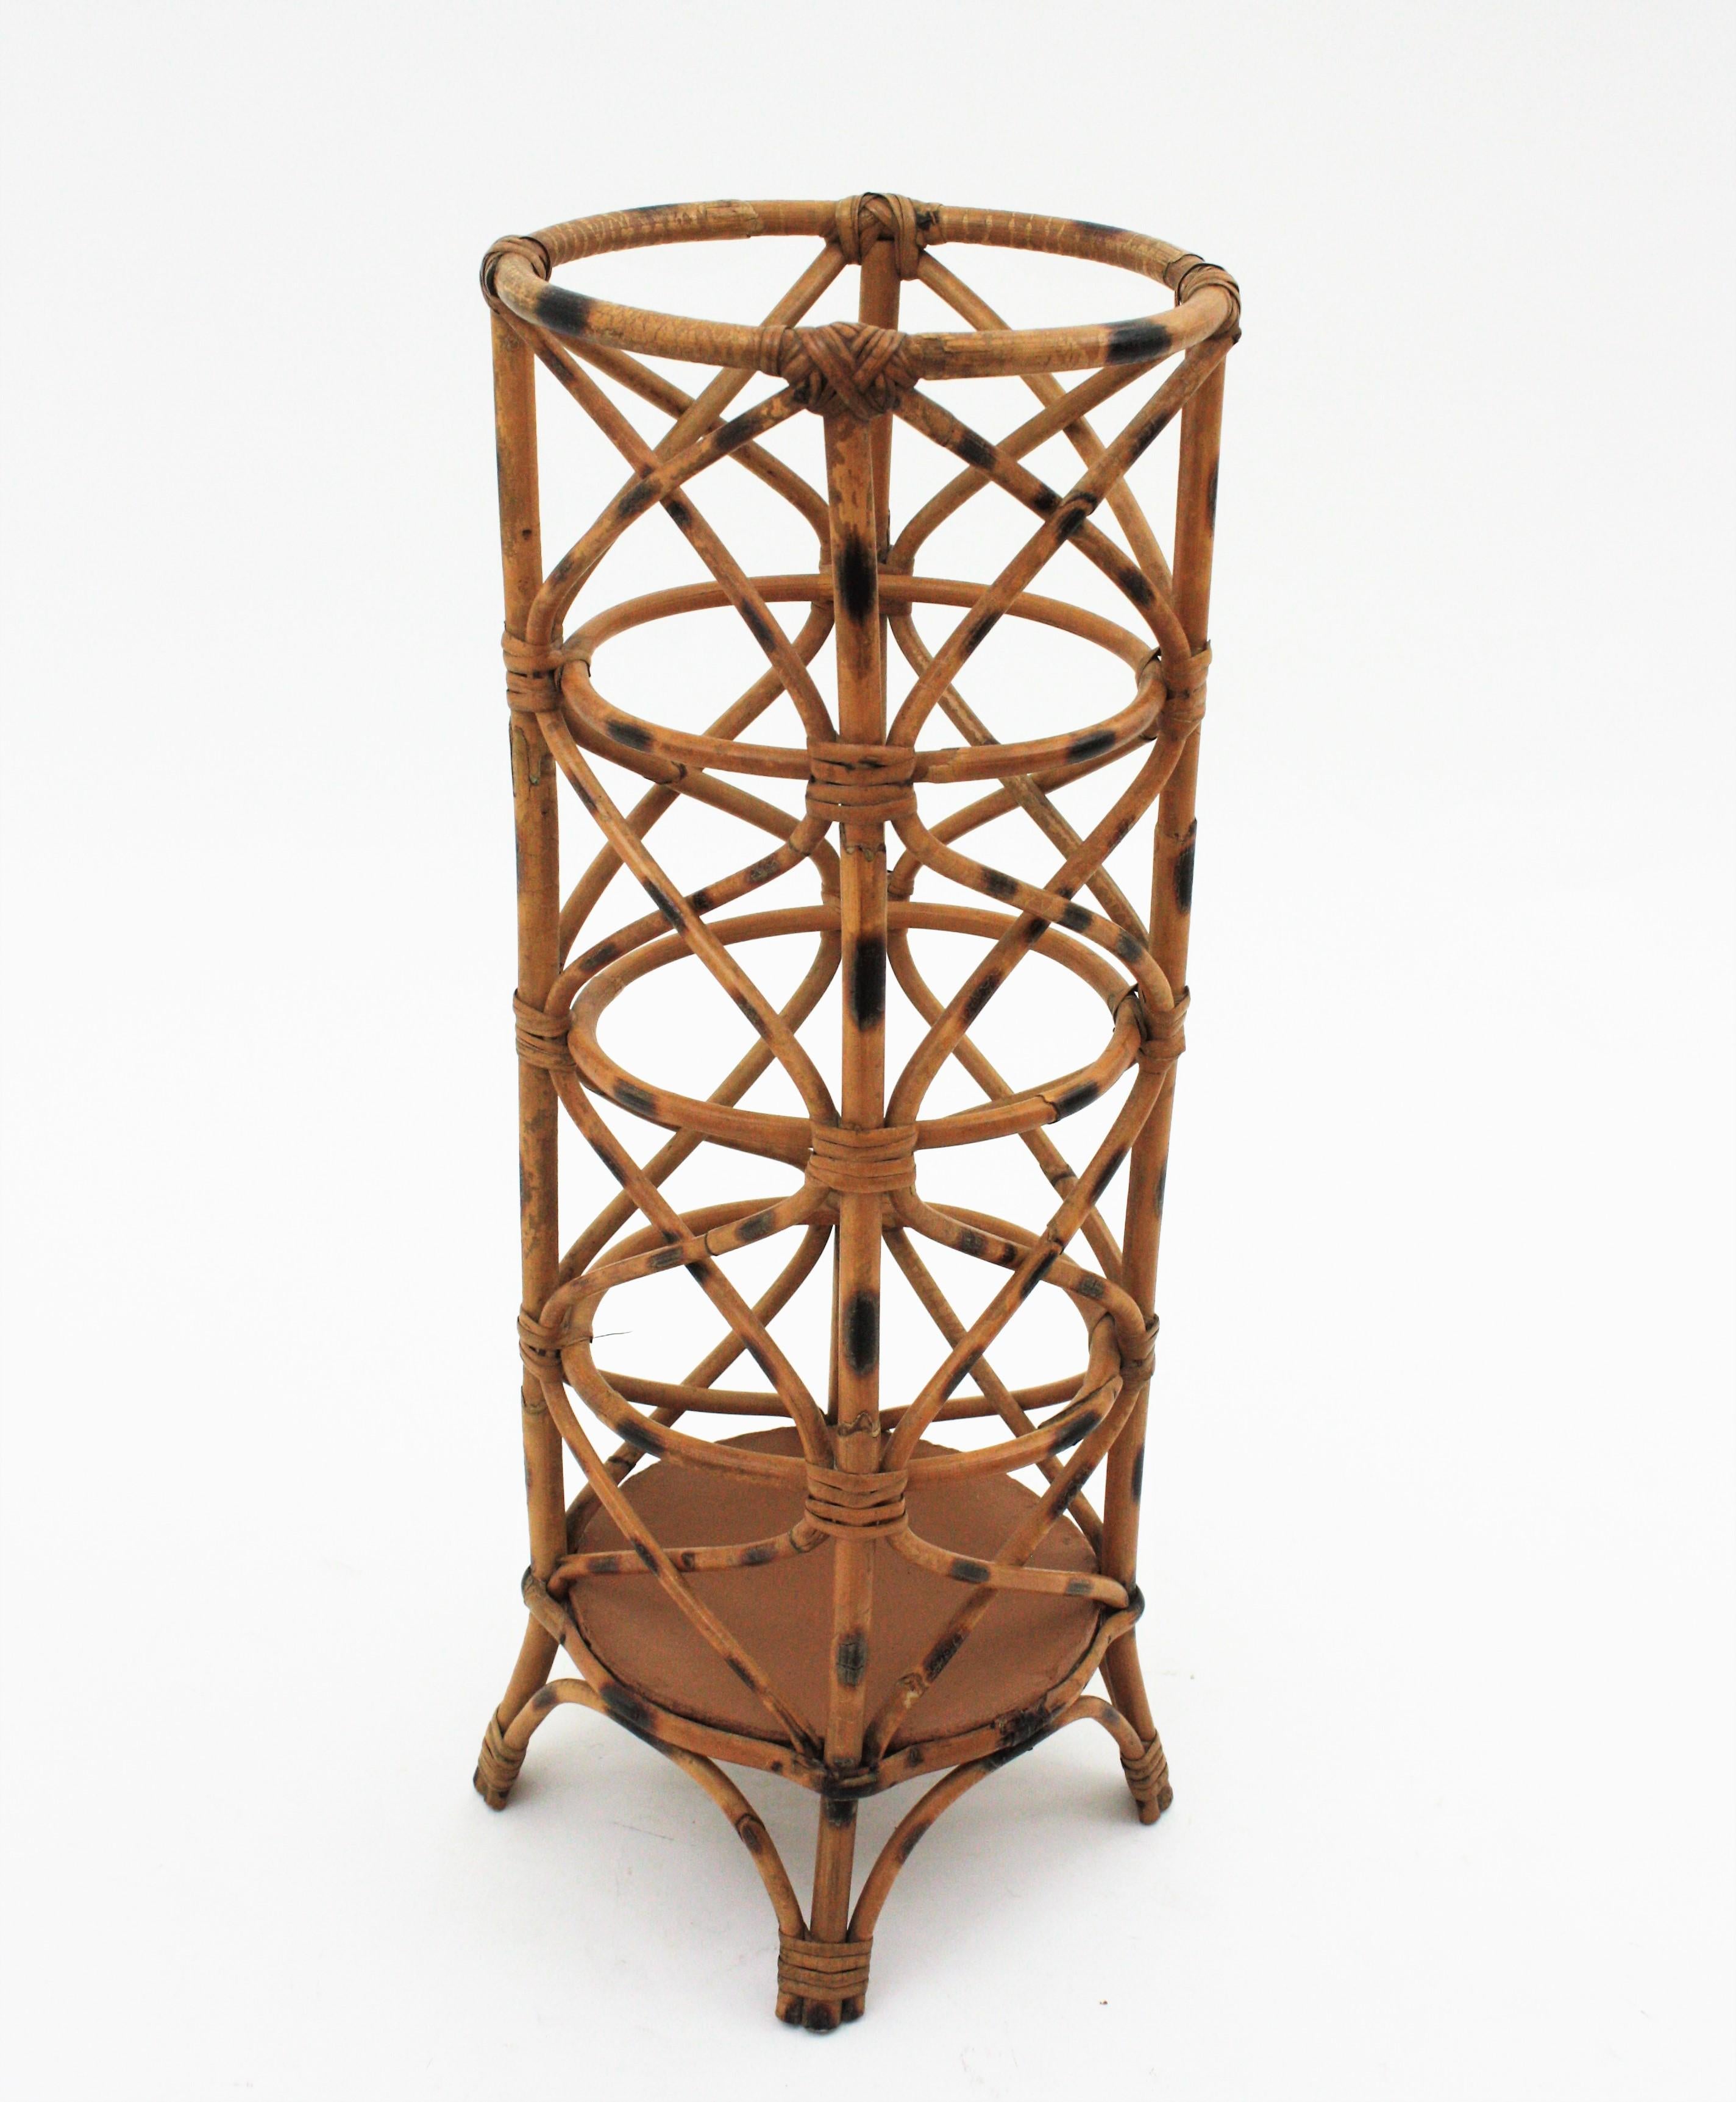 Beautiful Mid-Century Modern decorative bamboo rattan umbrella holder or tall planter. Handcrafted in Italy, 1970s.
This umbrella stand features an eye-catching construction made of rattan with pyrograohy accents.
It is in good vintage condition.